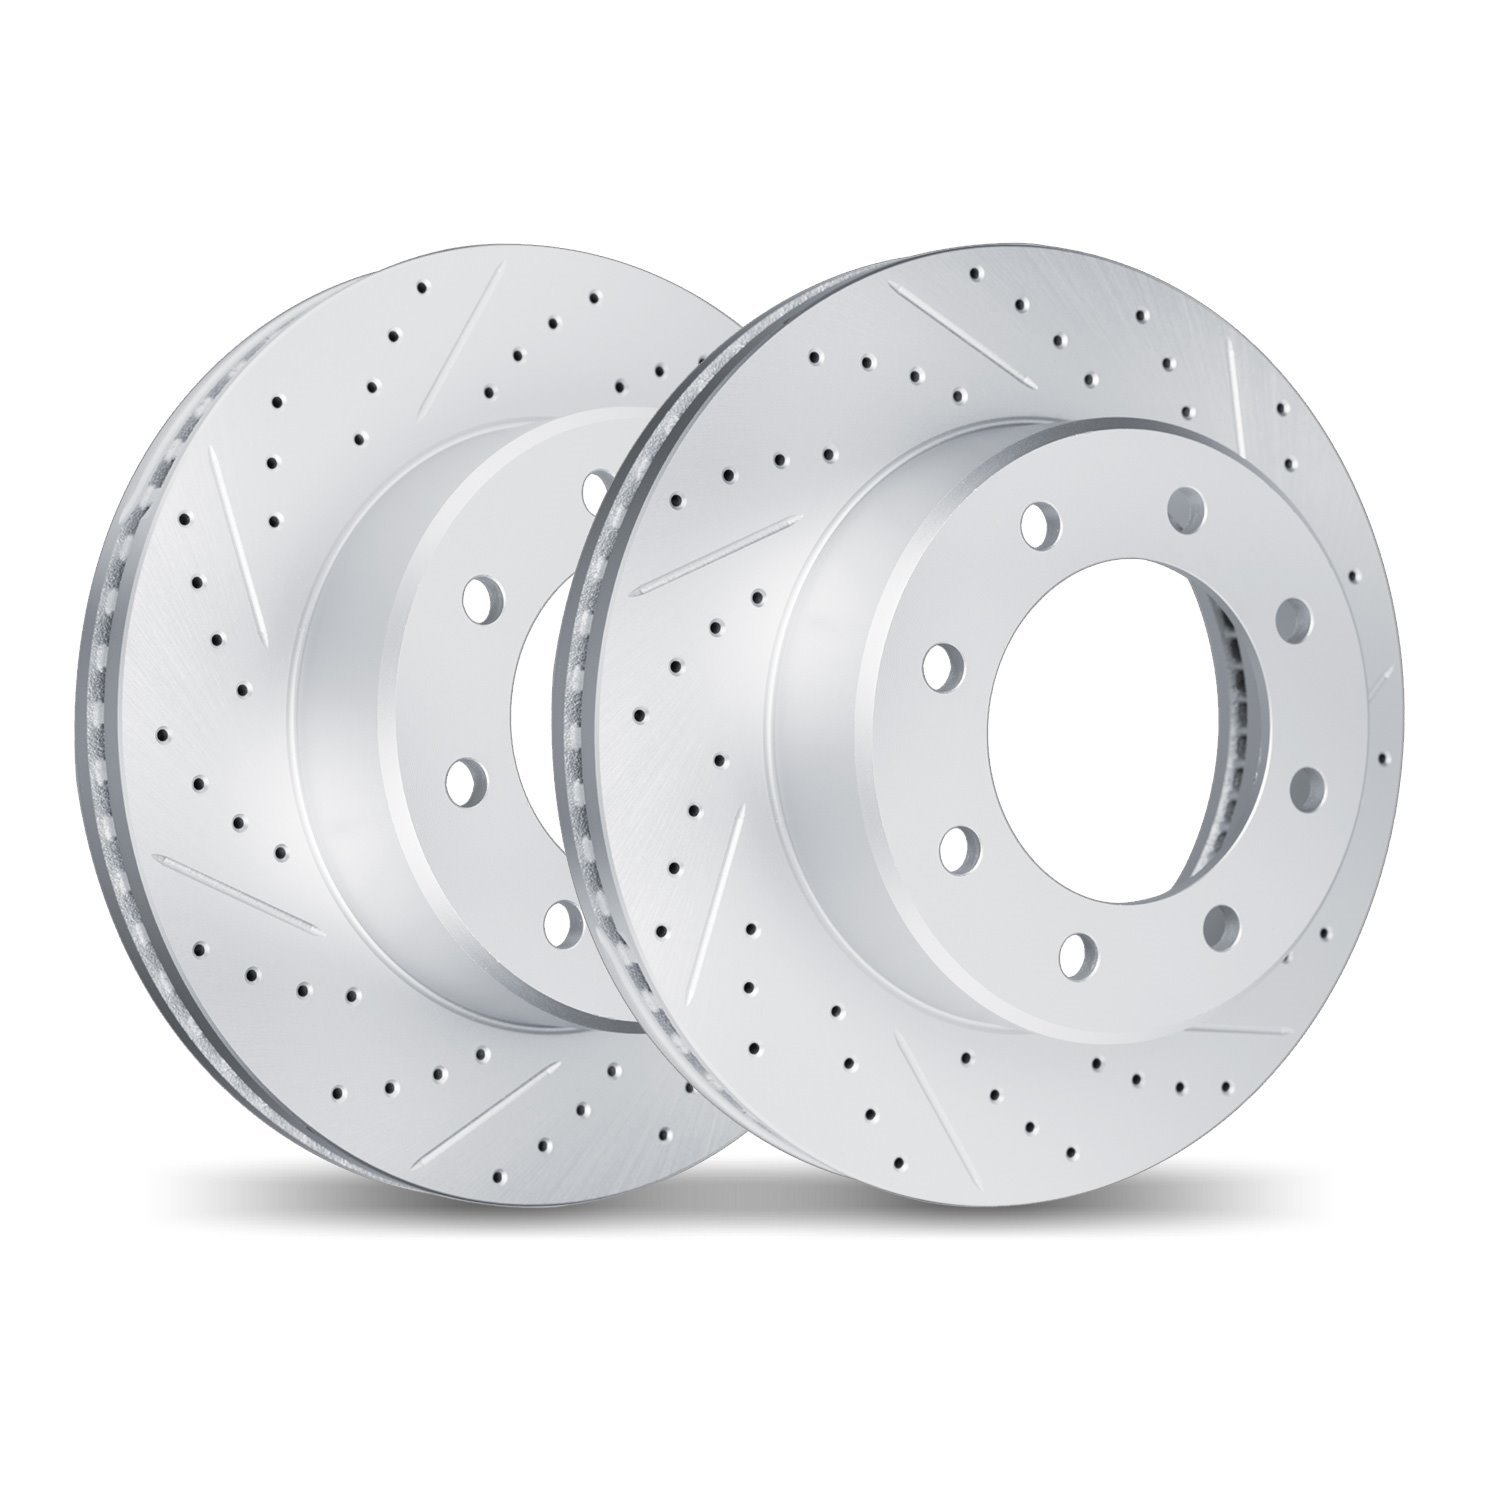 2002-48044 Geoperformance Drilled/Slotted Brake Rotors, 2001-2010 GM, Position: Rear